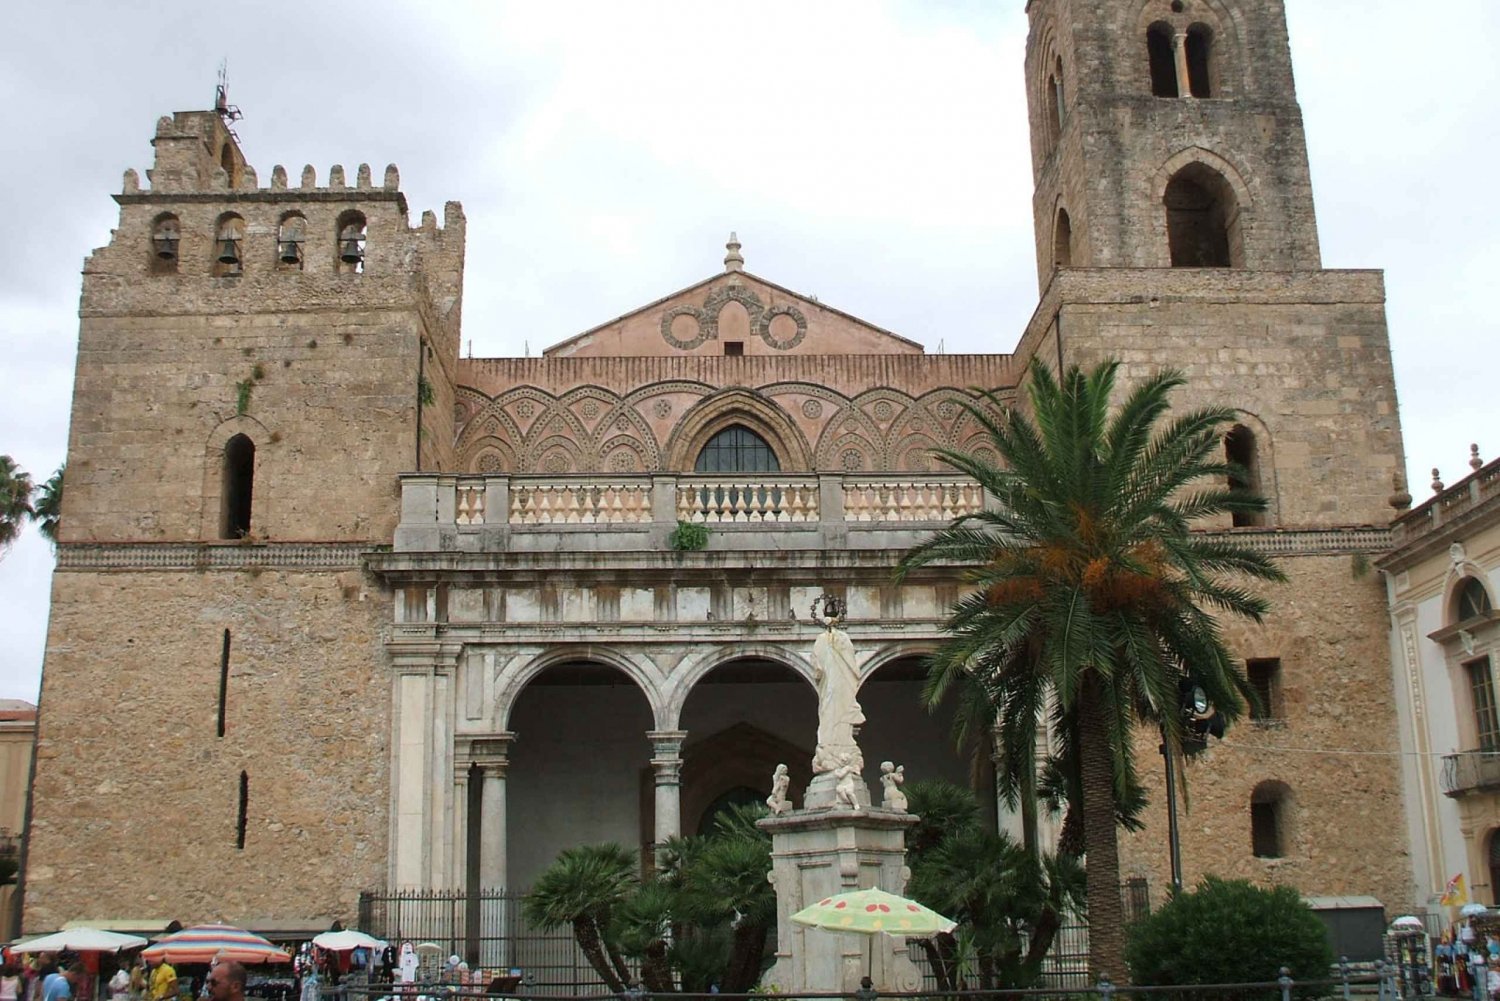 Monreale: Guided tour of Cathedral, Monastery and Mosaics